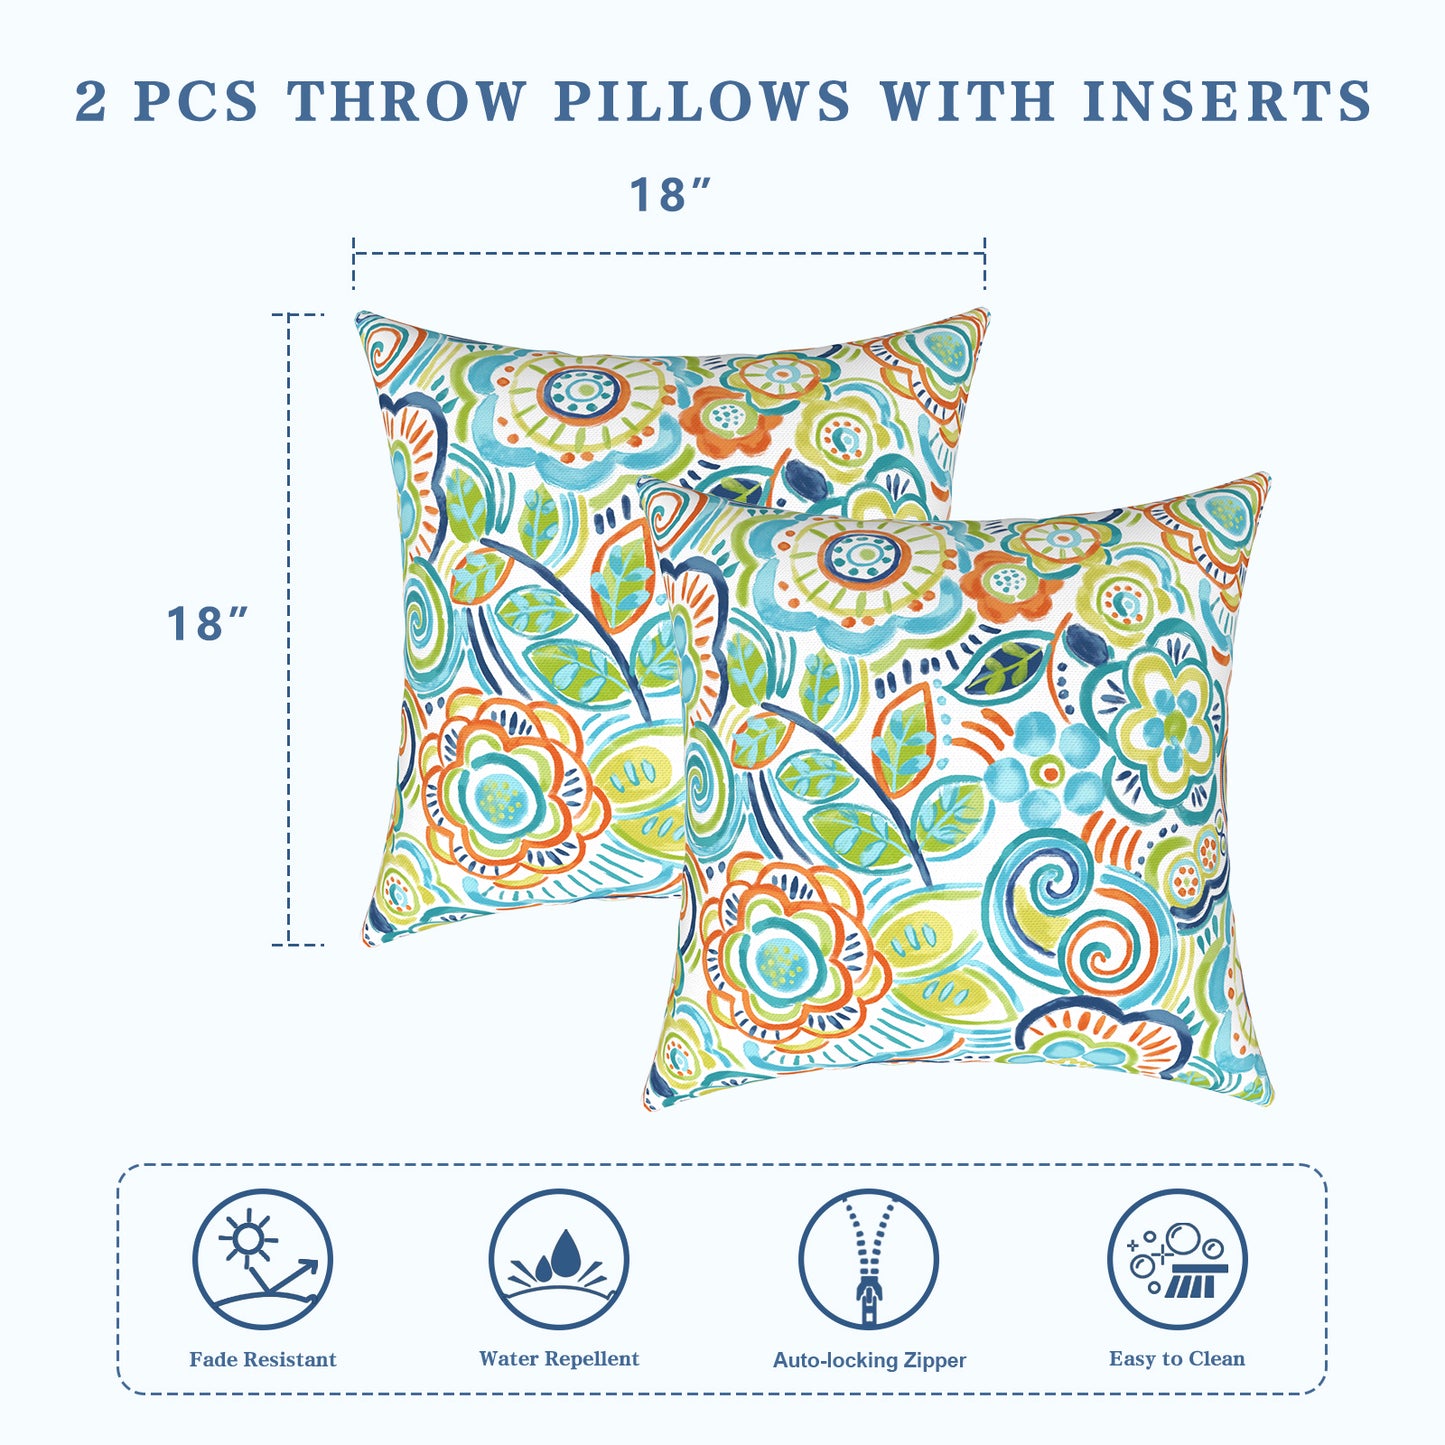 Melody Elephant Patio Throw Pillows with Inners, Fade Resistant Square Pillow Pack of 2, Decorative Garden Cushions for Home, 18x18 Inch, Flower Blue